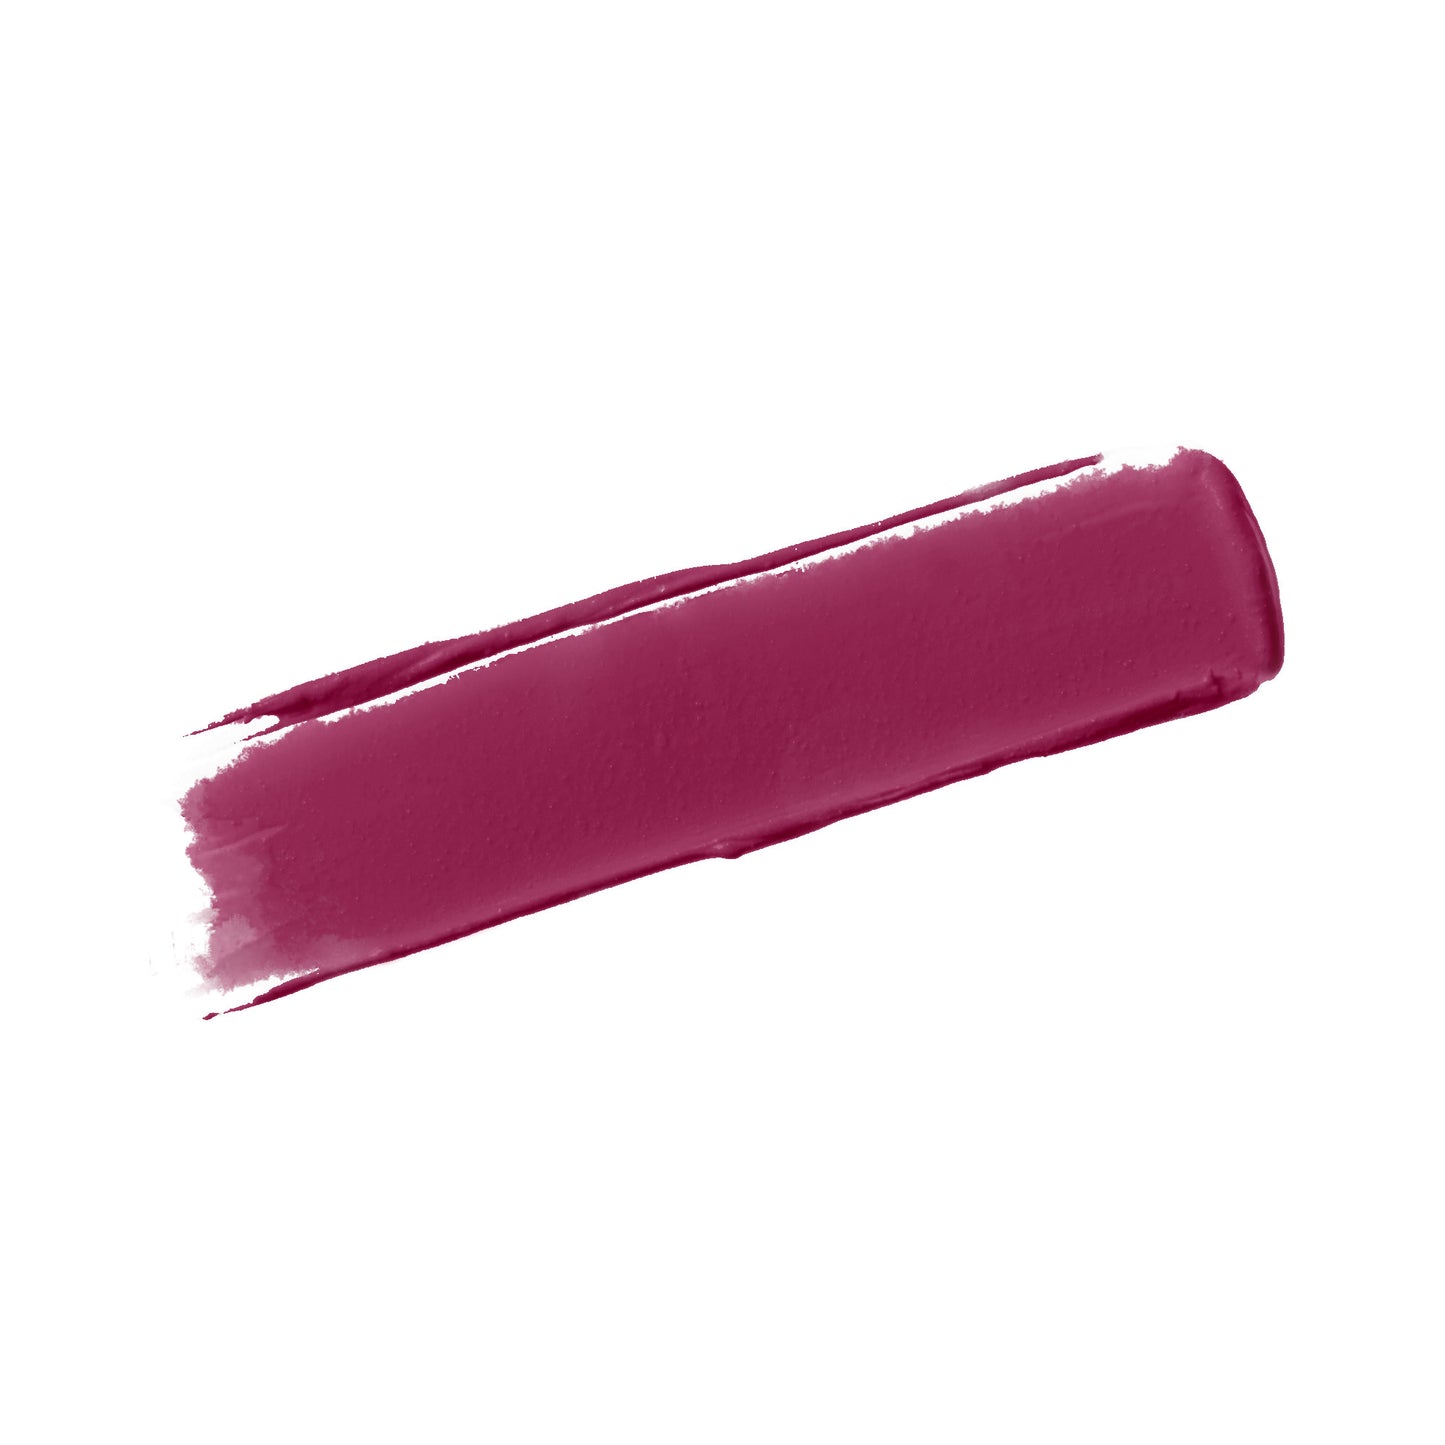 NXTE NXTEssence Charmed Liquid Lip Stick Color Swatch